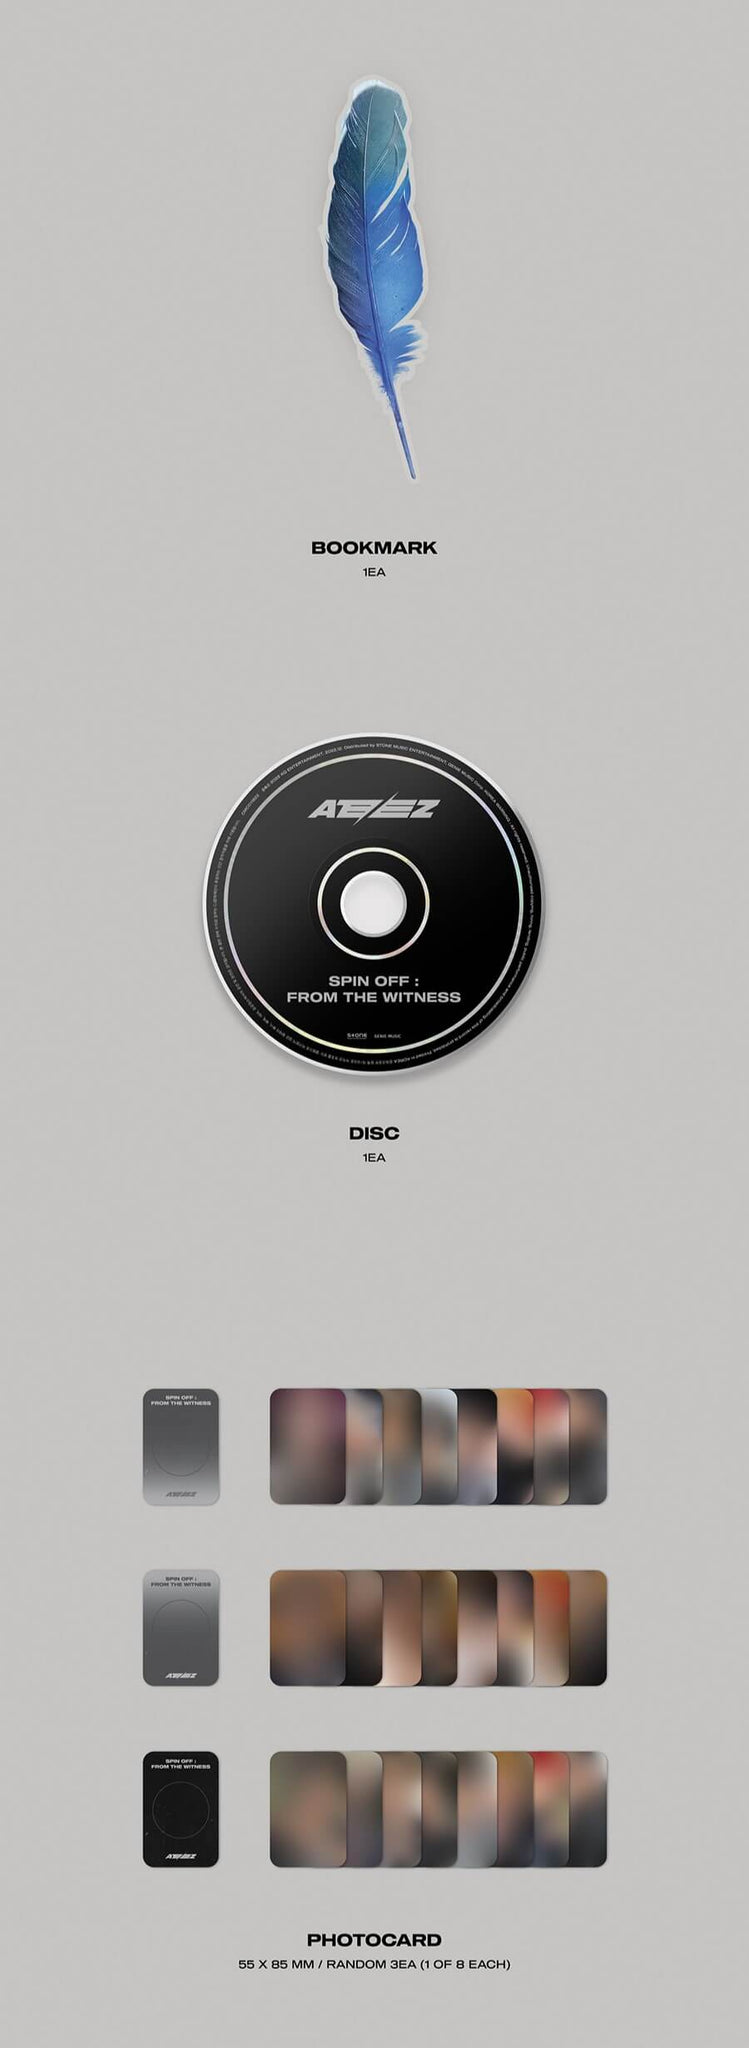 ATEEZ SPIN OFF: FROM THE WITNESS Limited Edition - WITNESS Version Inclusions Bookmark CD Photocards